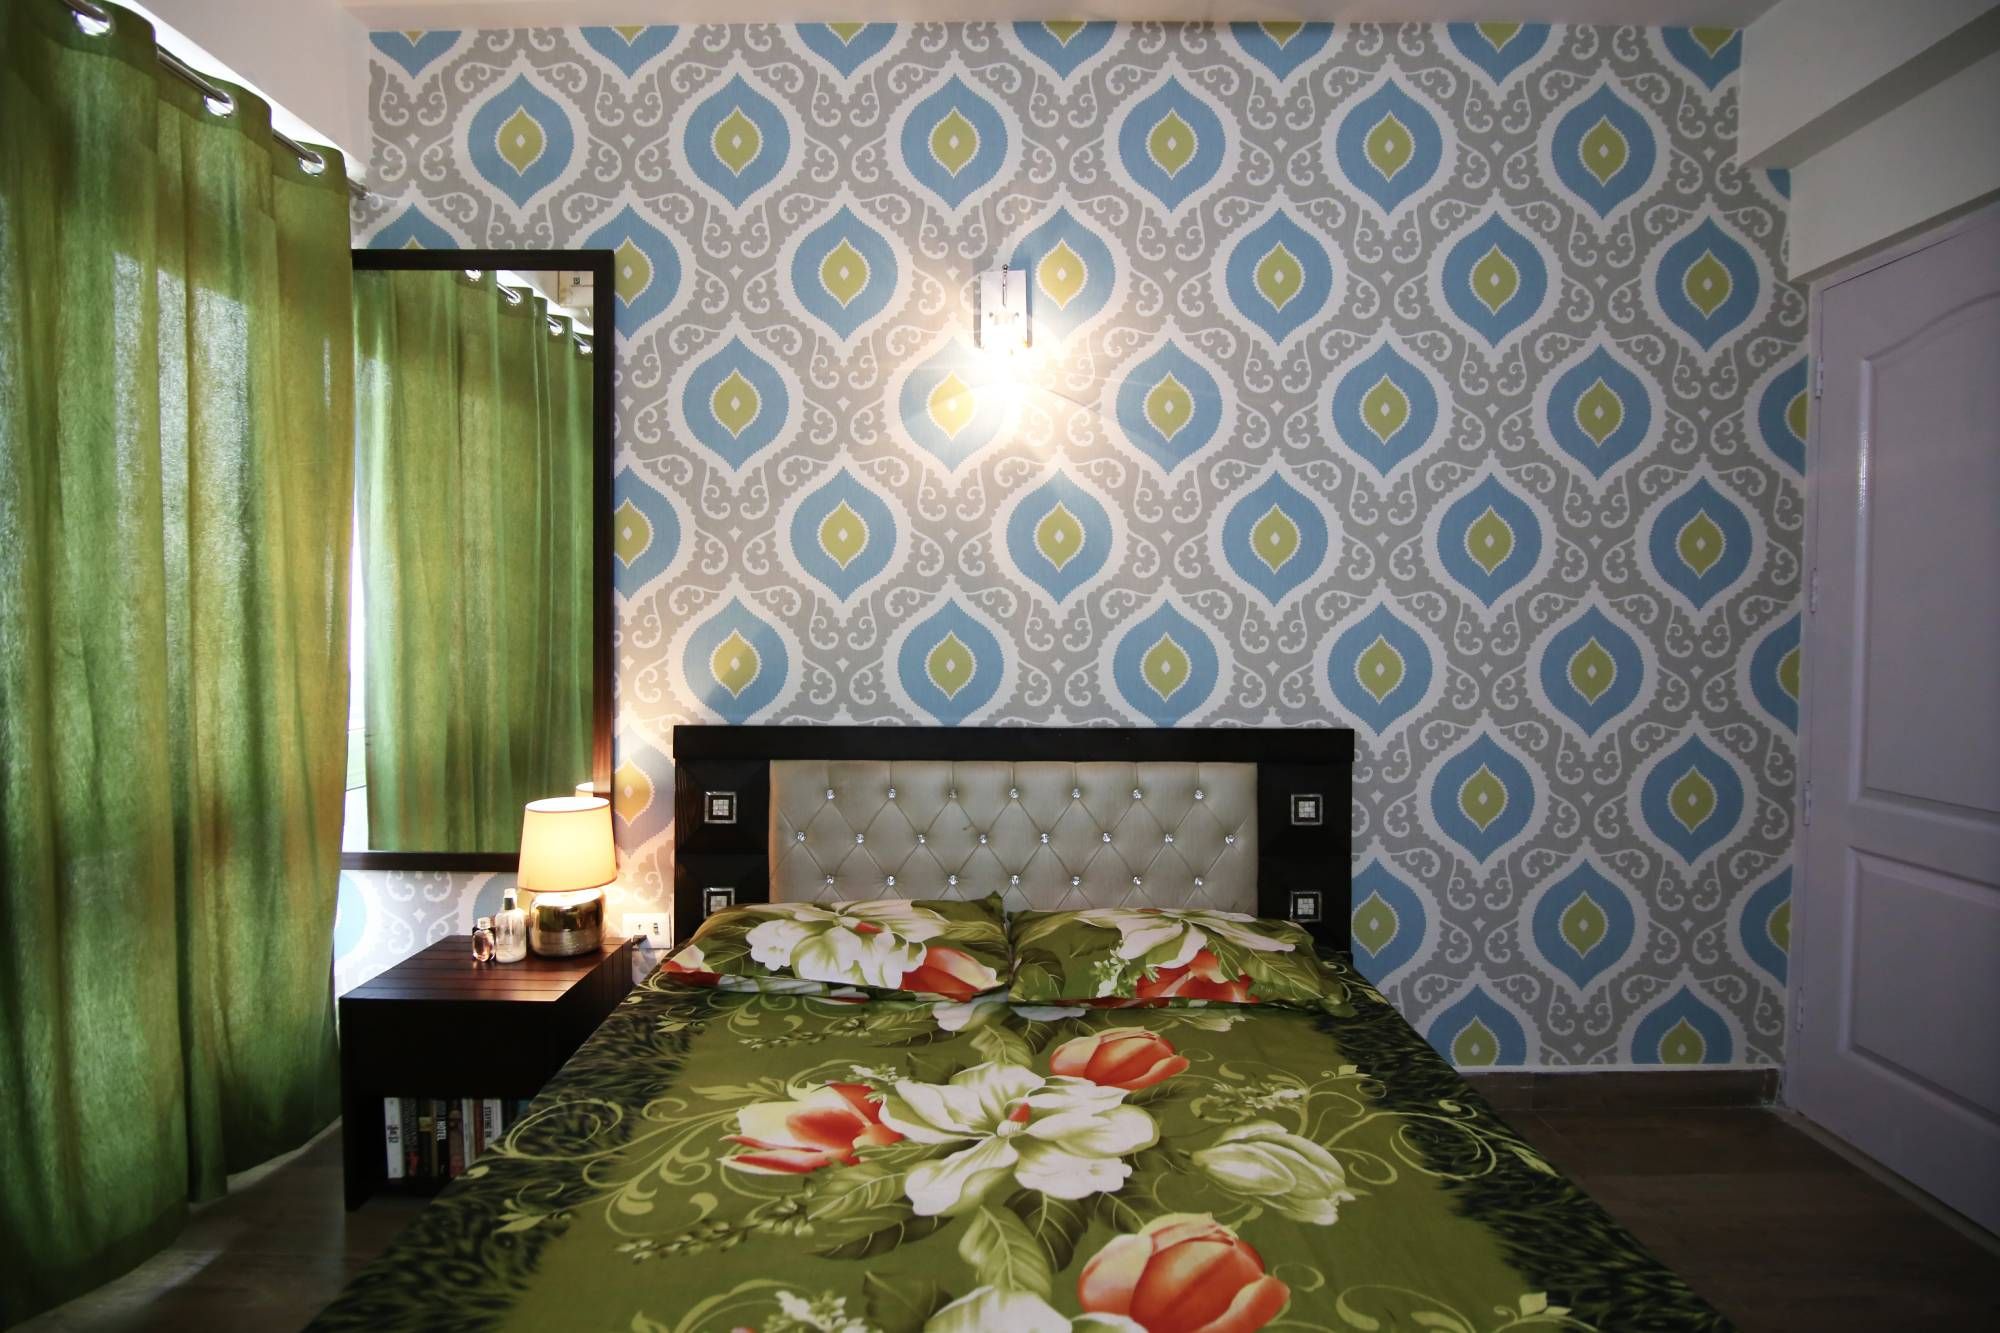 Modern Guest Room Design With Patterned Wallpaper